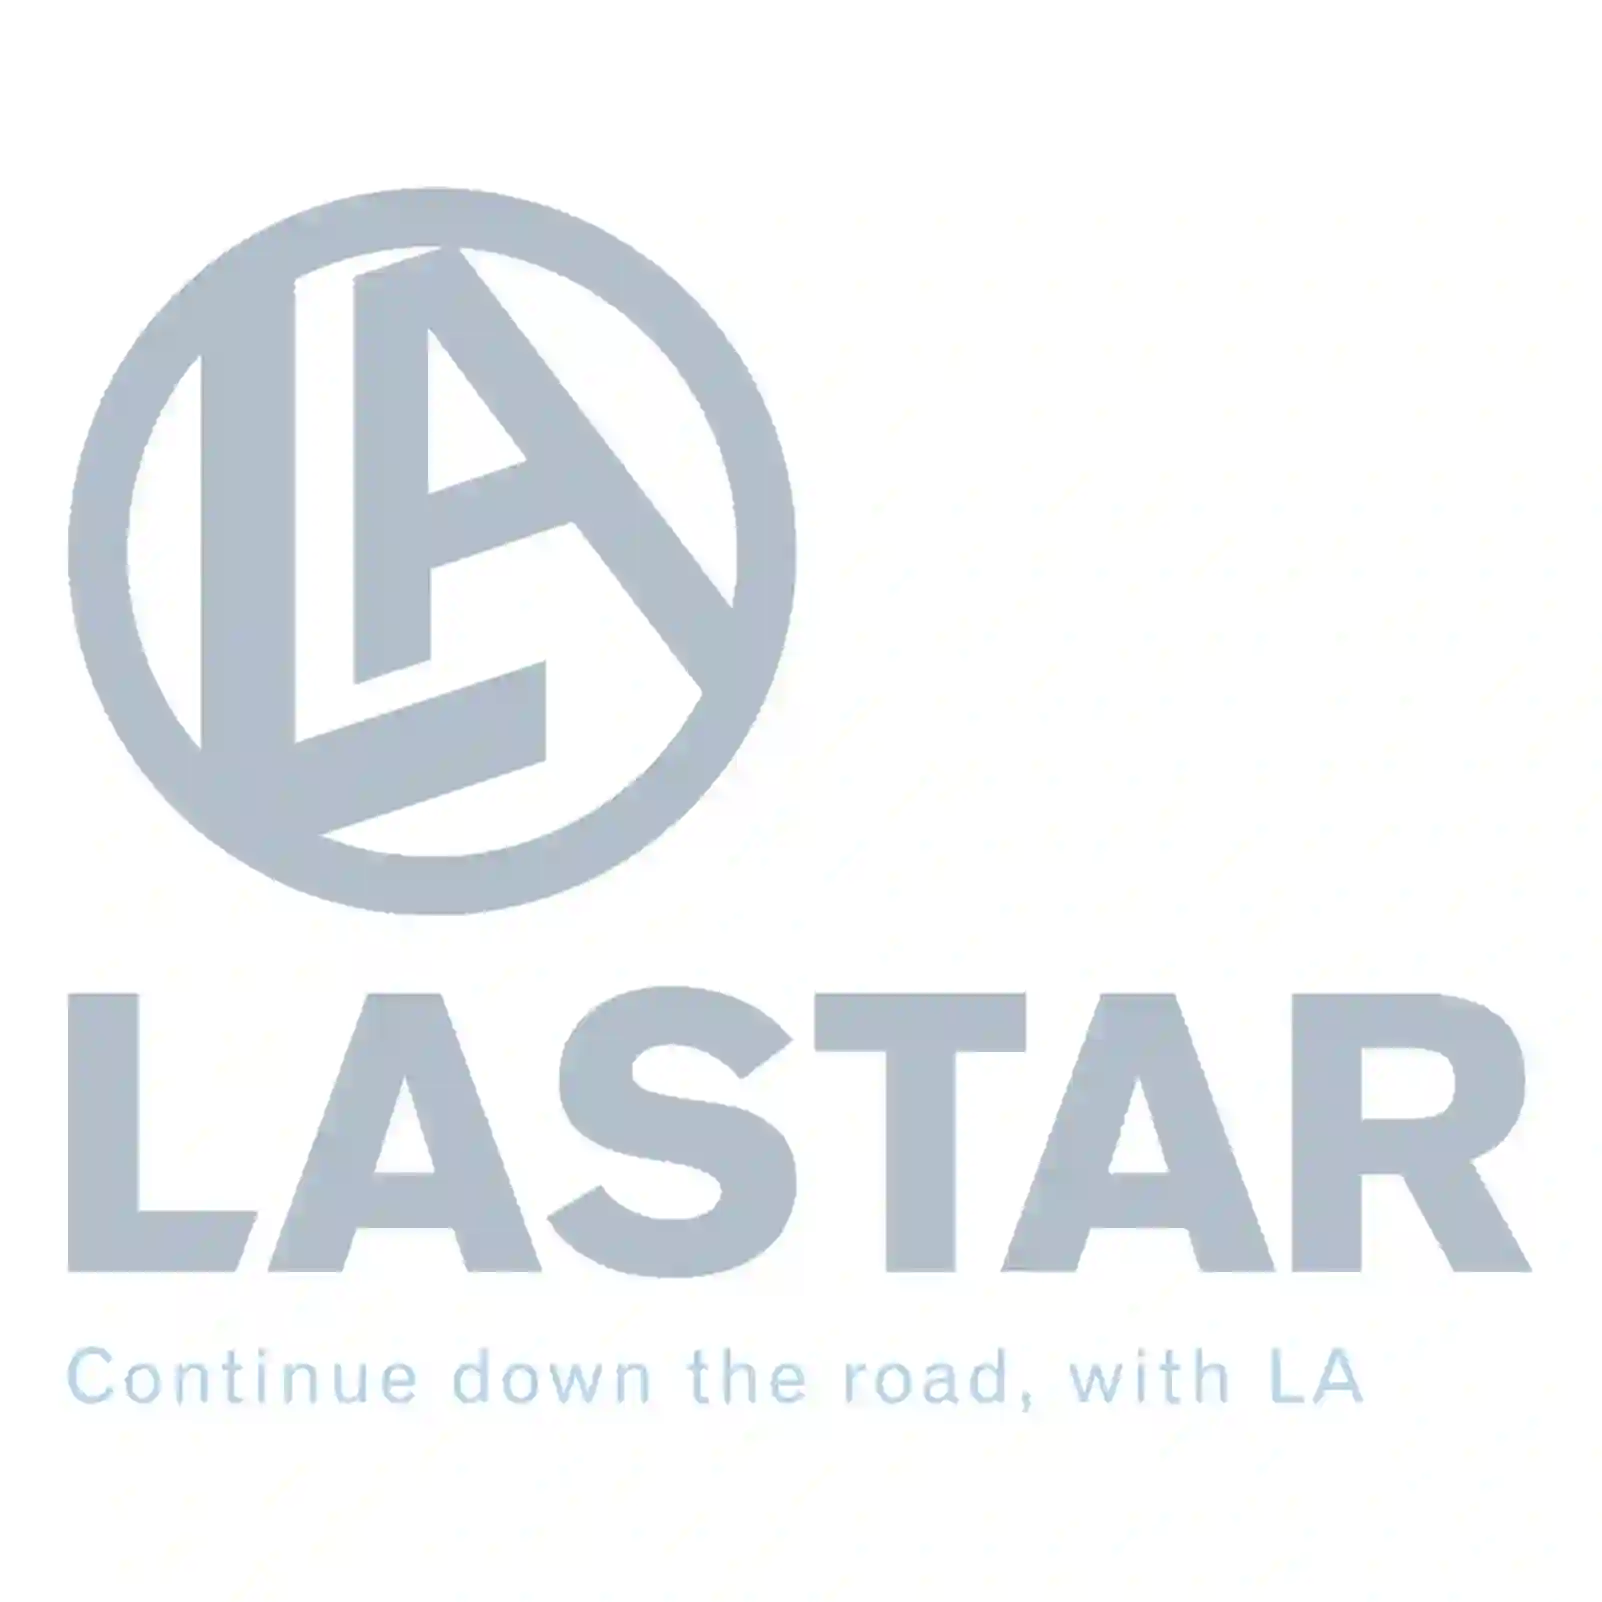  Turn signal lamp, lateral, without bulb || Lastar Spare Part | Truck Spare Parts, Auotomotive Spare Parts